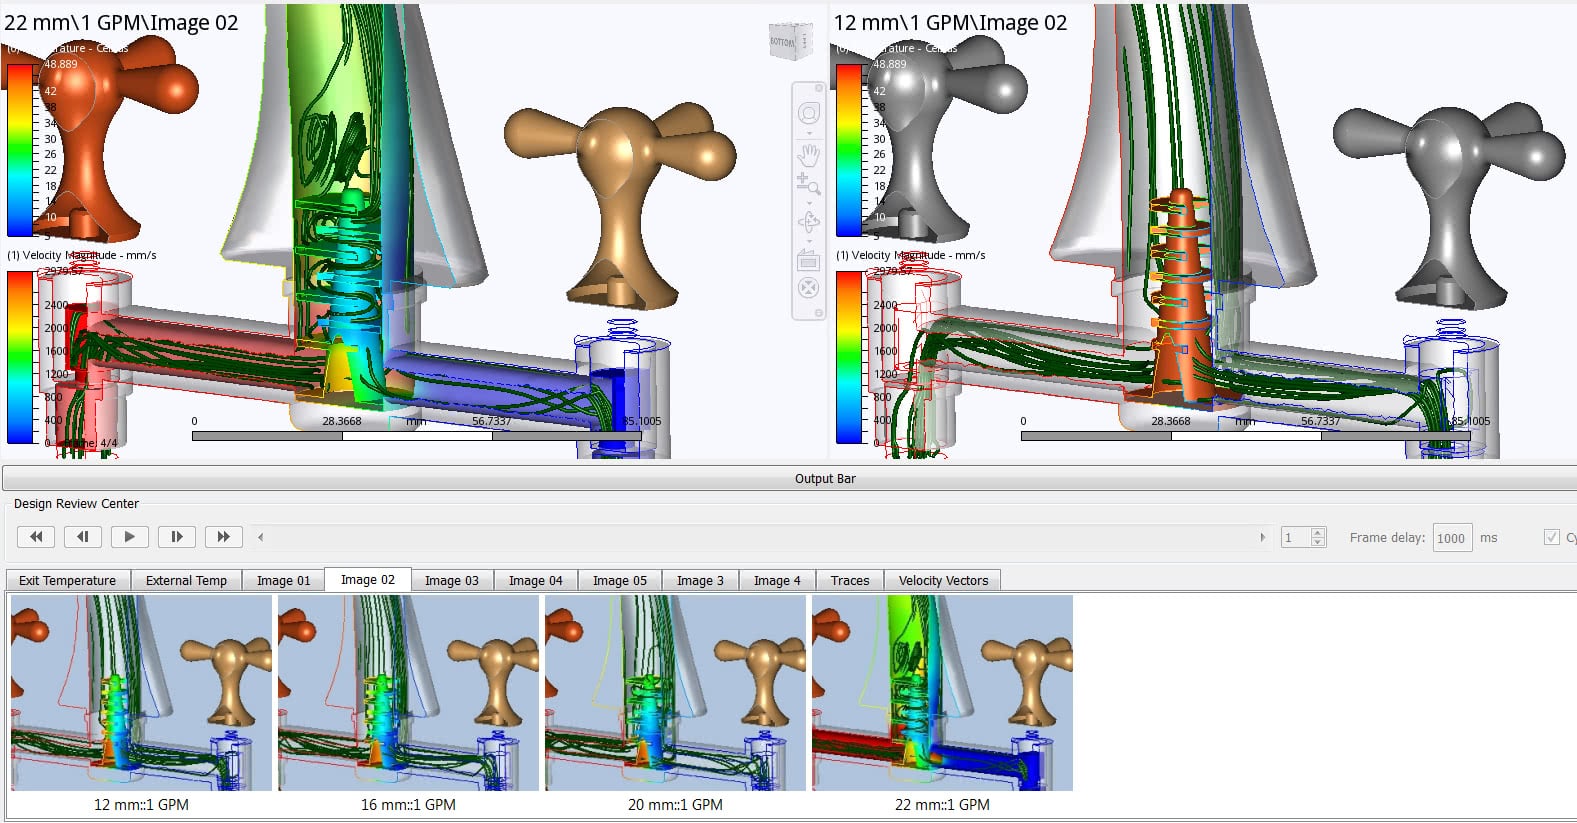 Screenshot of Autodesk CFD design review center showing several renderings of a faucet